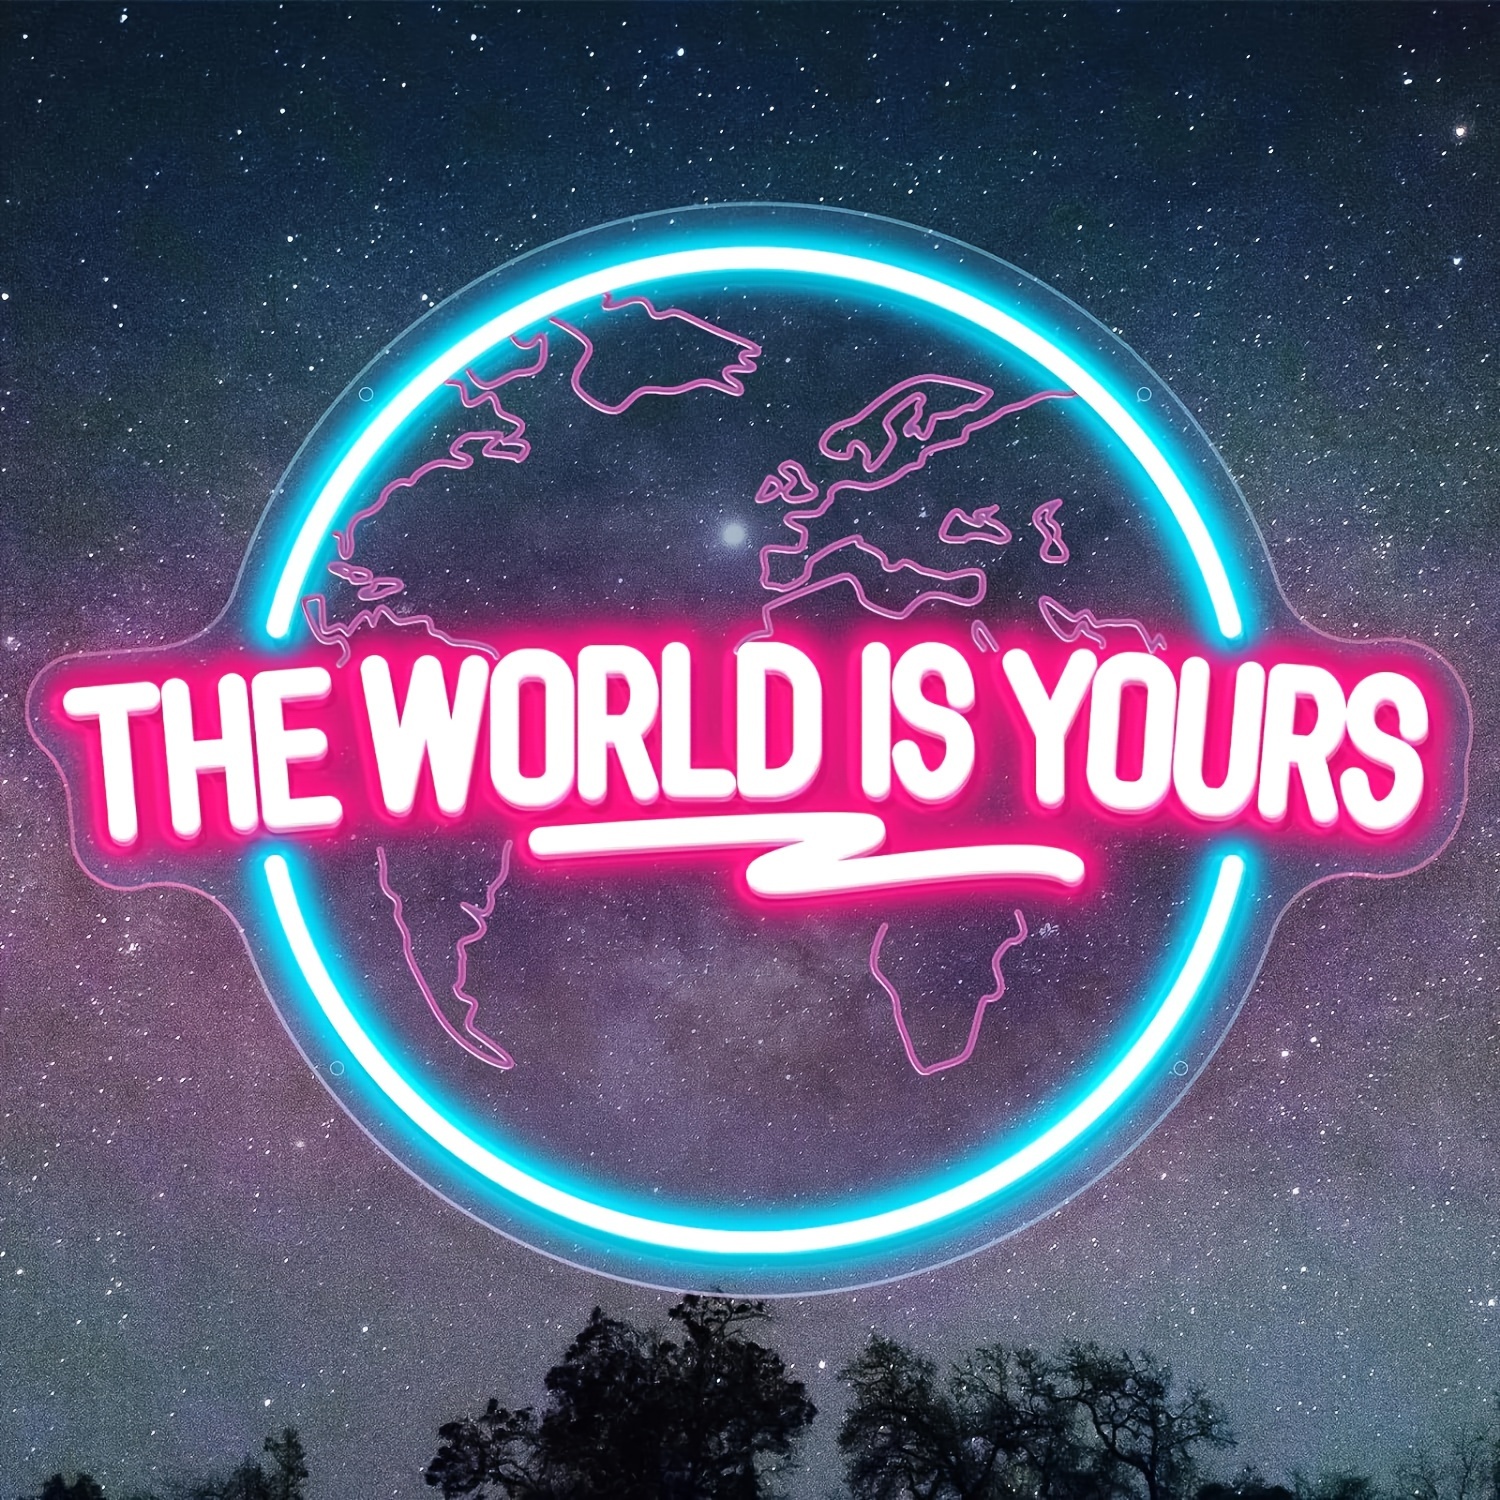 

glowing Globe" World Is Your Led Neon Sign - Usb-powered, 10-level Dimmable Multicolor Light For Wall Decor, Offices, Weddings, Man Caves, Game Rooms & Bedrooms